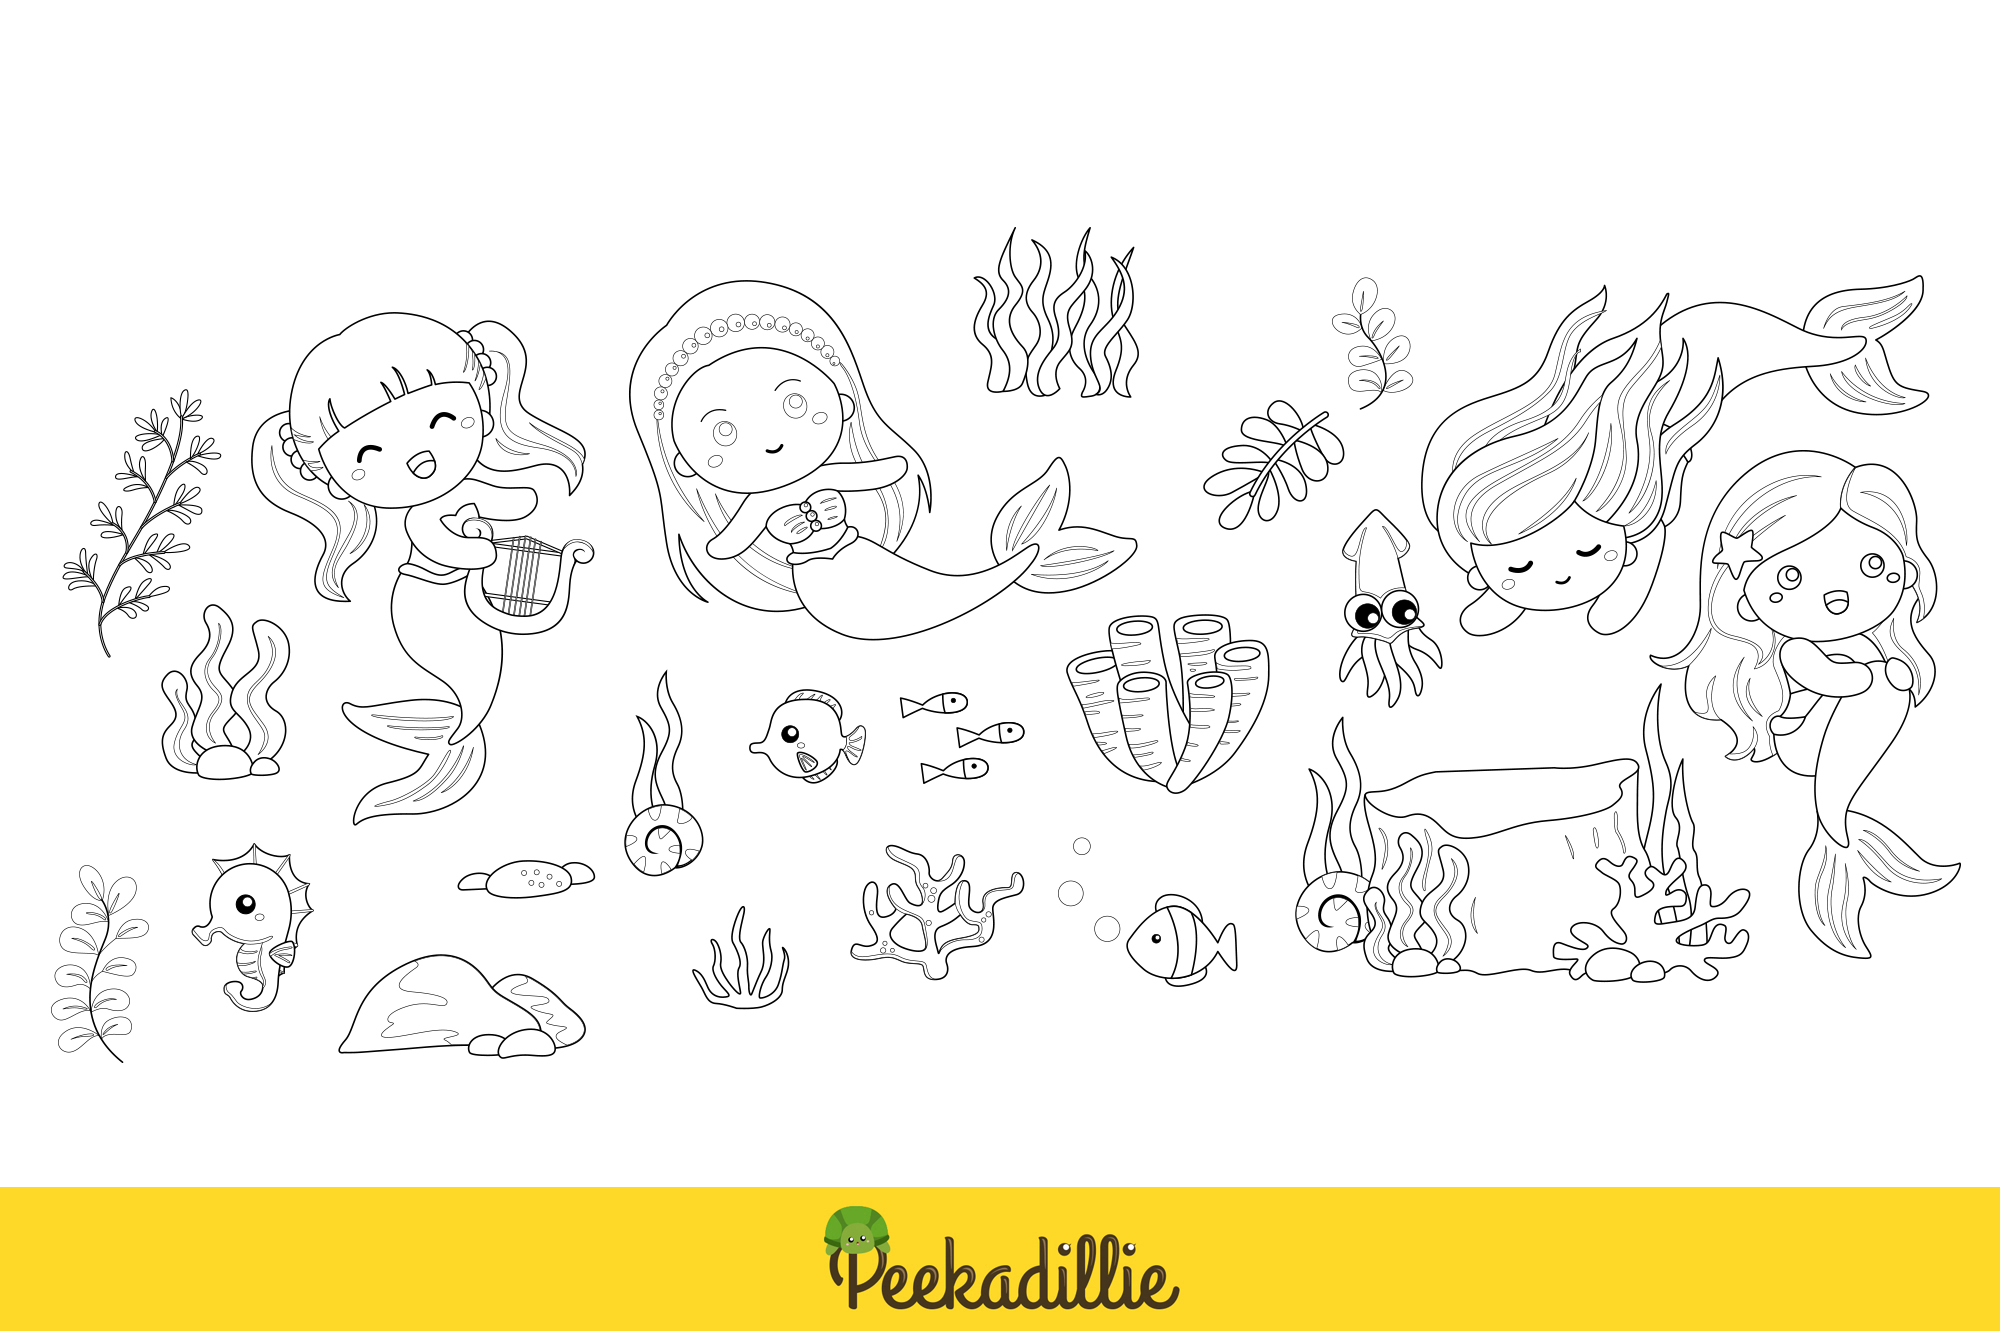 Coloring page with mermaids and sea animals.